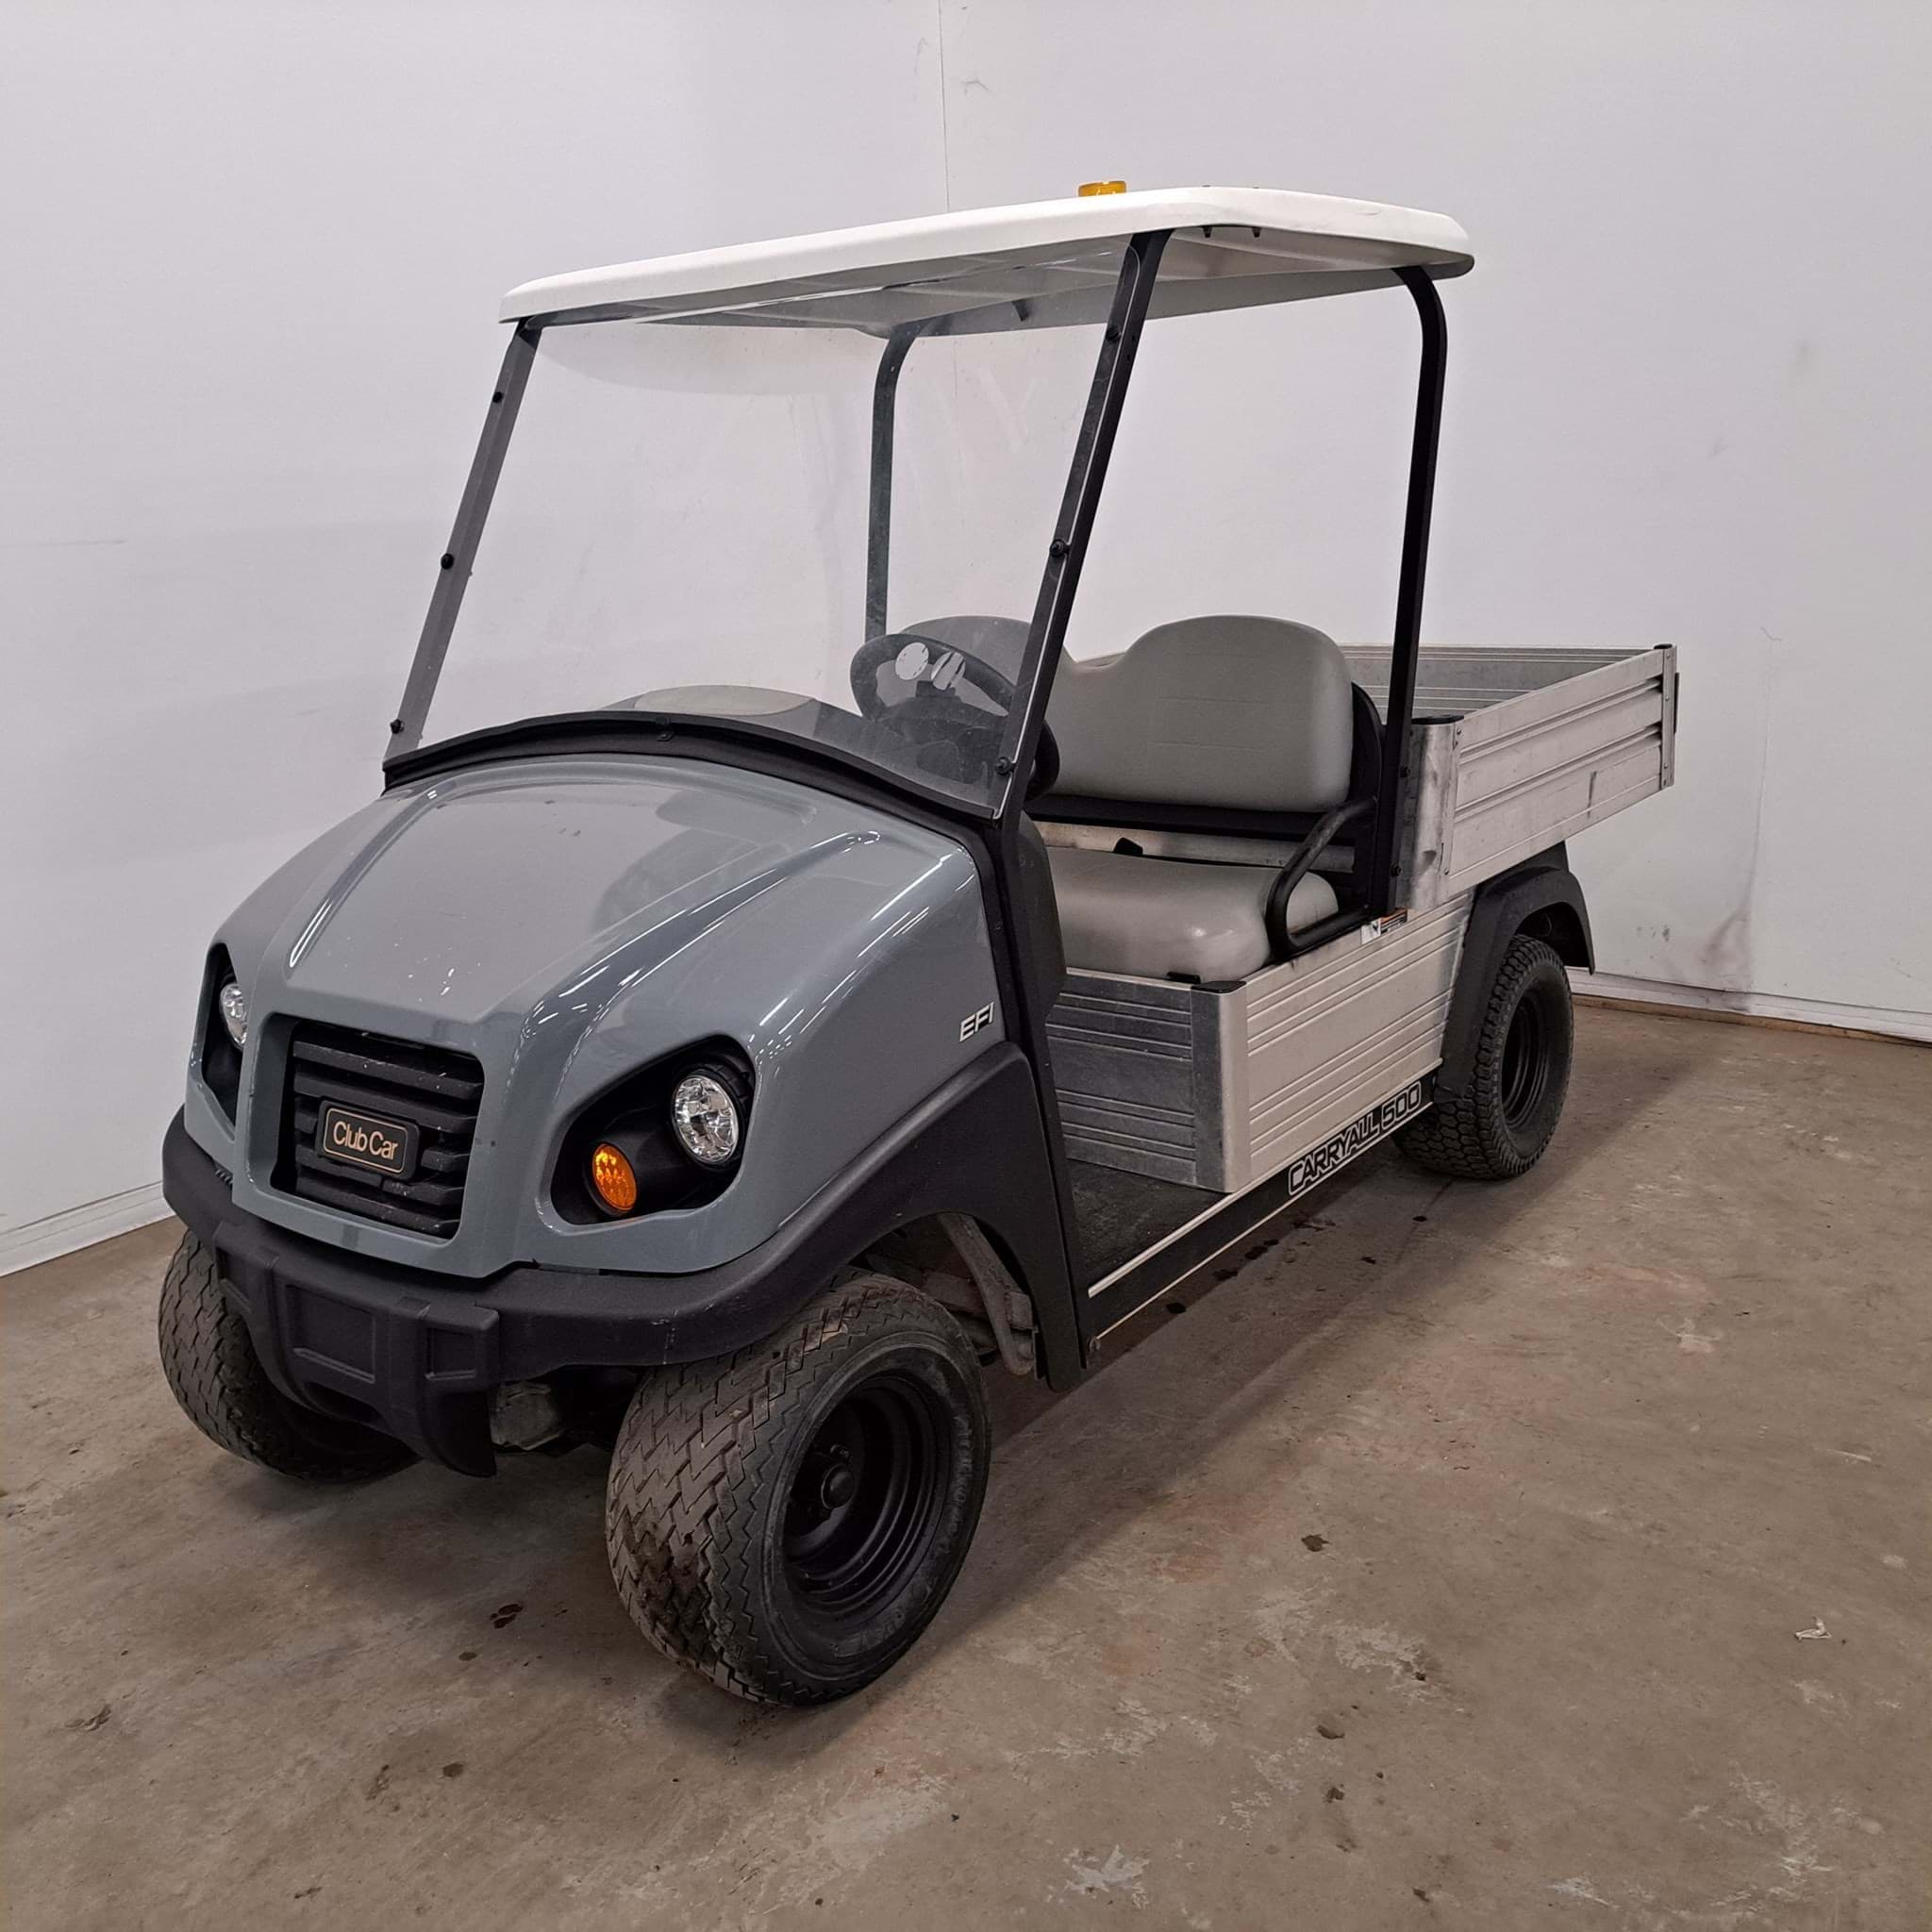 Picture of Trade - 2018 - Electric - Club Car - Carryall 500 - Open Cargobox - Green